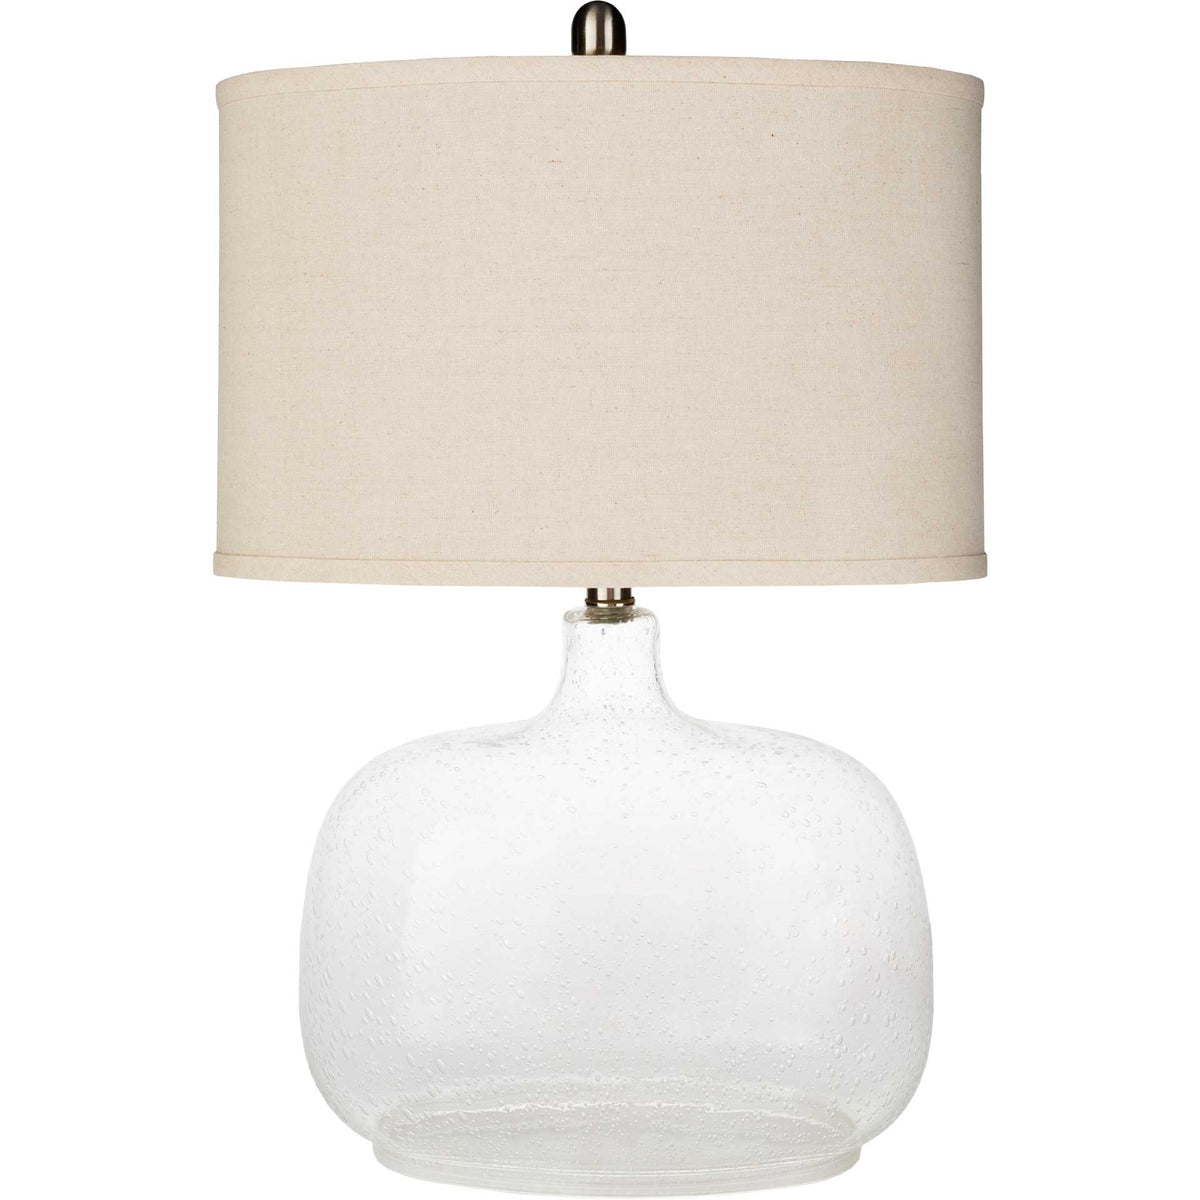 Bria Table Lamp Beige/Butter